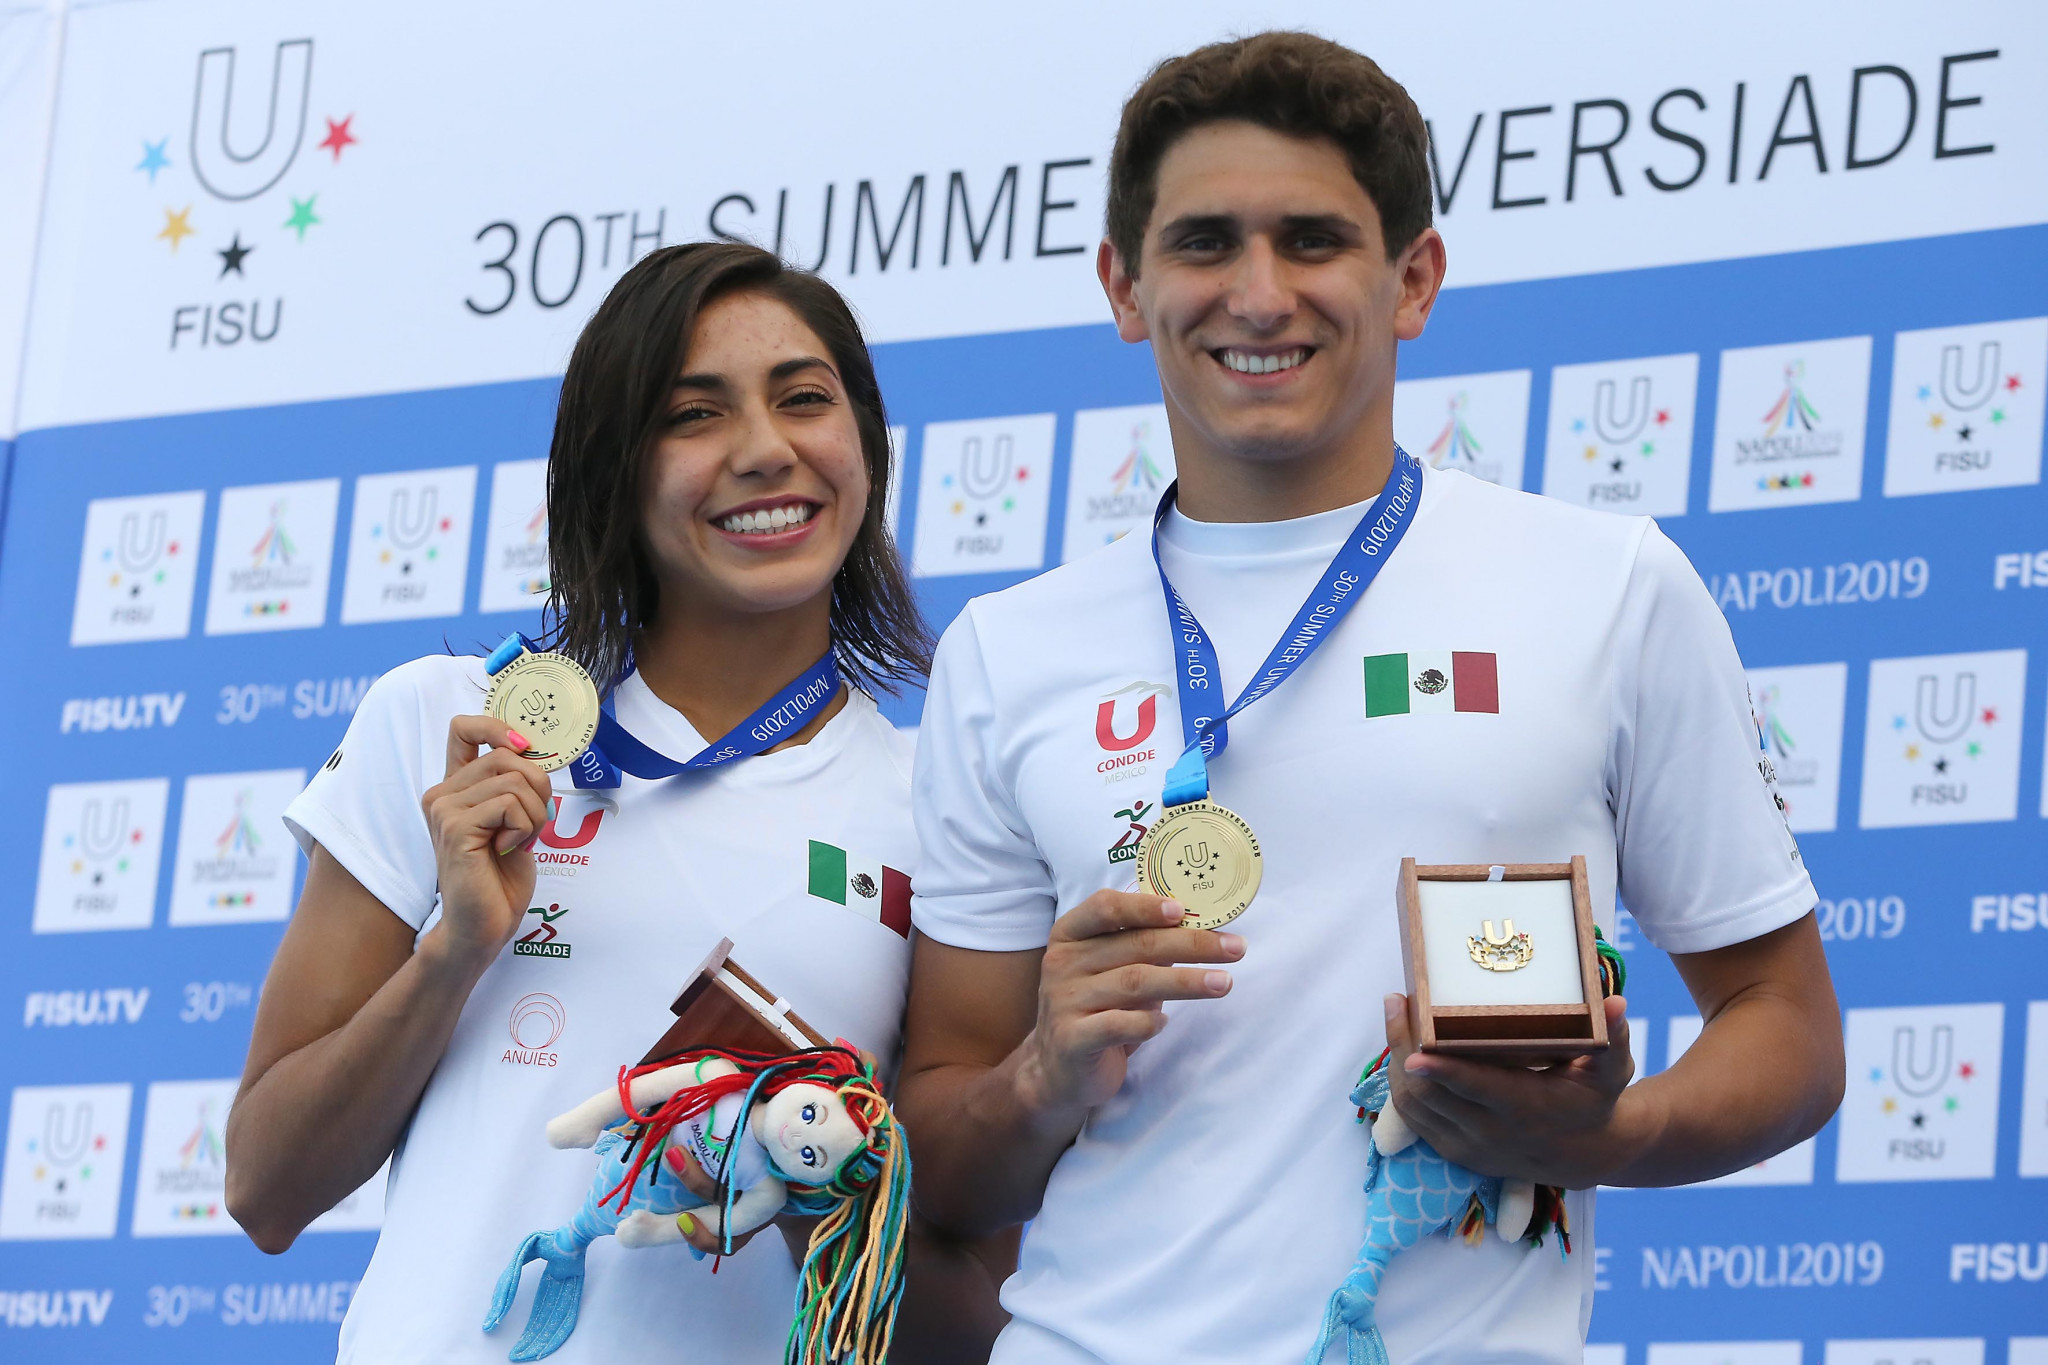 Mexico halted China's diving domination with two golds at Mostra d'Oltremare ©Naples 2019